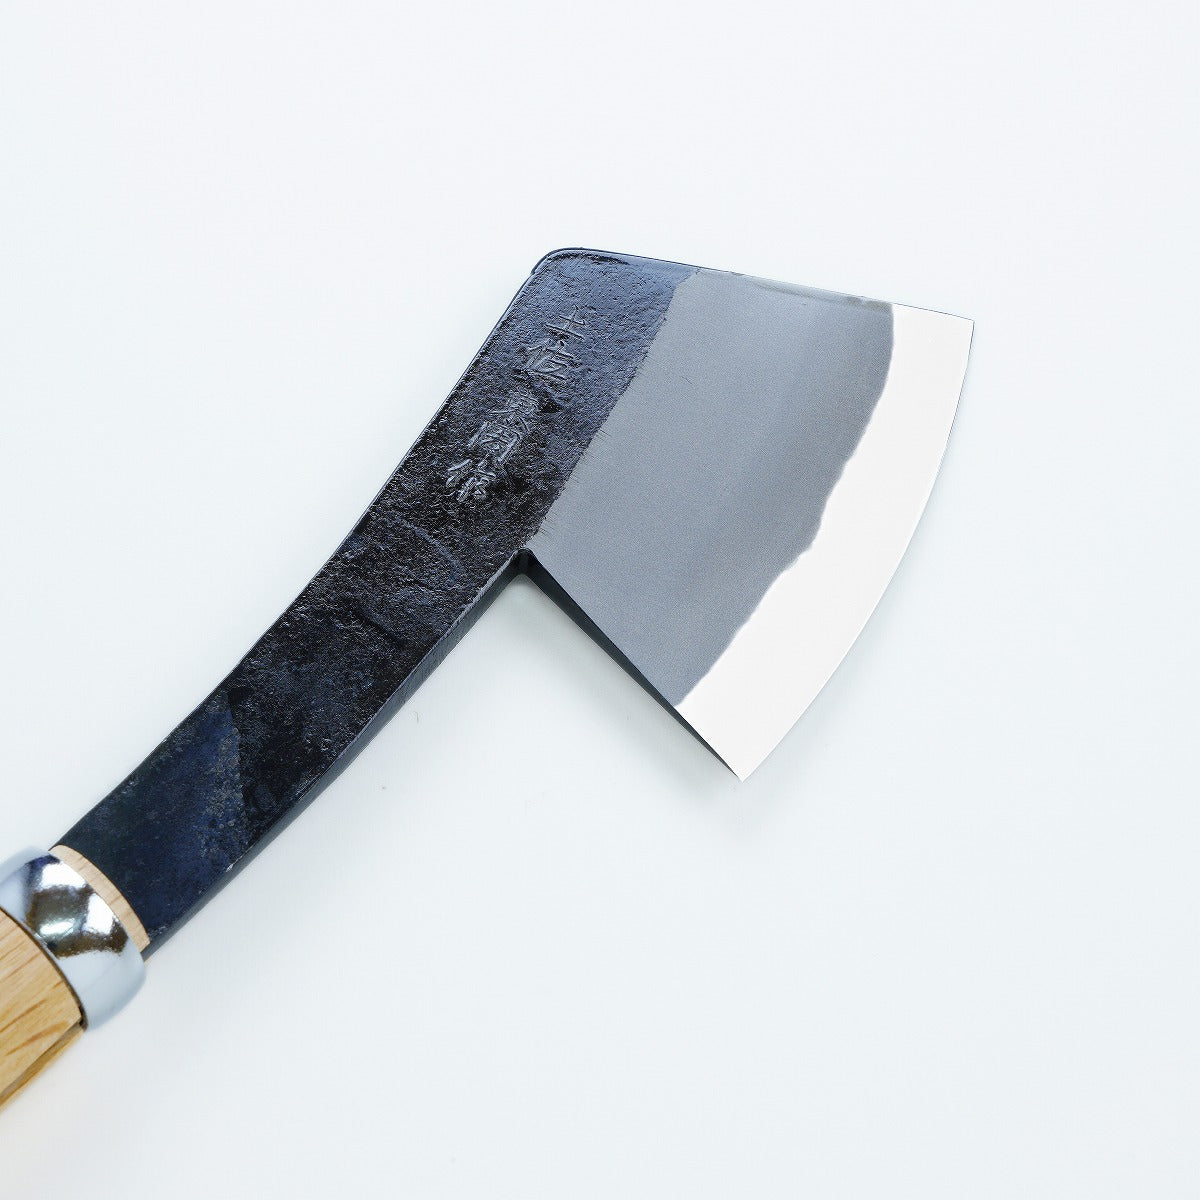 HONMAMON Cow Hoof Cutting Hatchet (Japanese Style) with Wooden Handle Blade 100mm(3.9inch), Blade Edge : Shirogami Steel No. 2